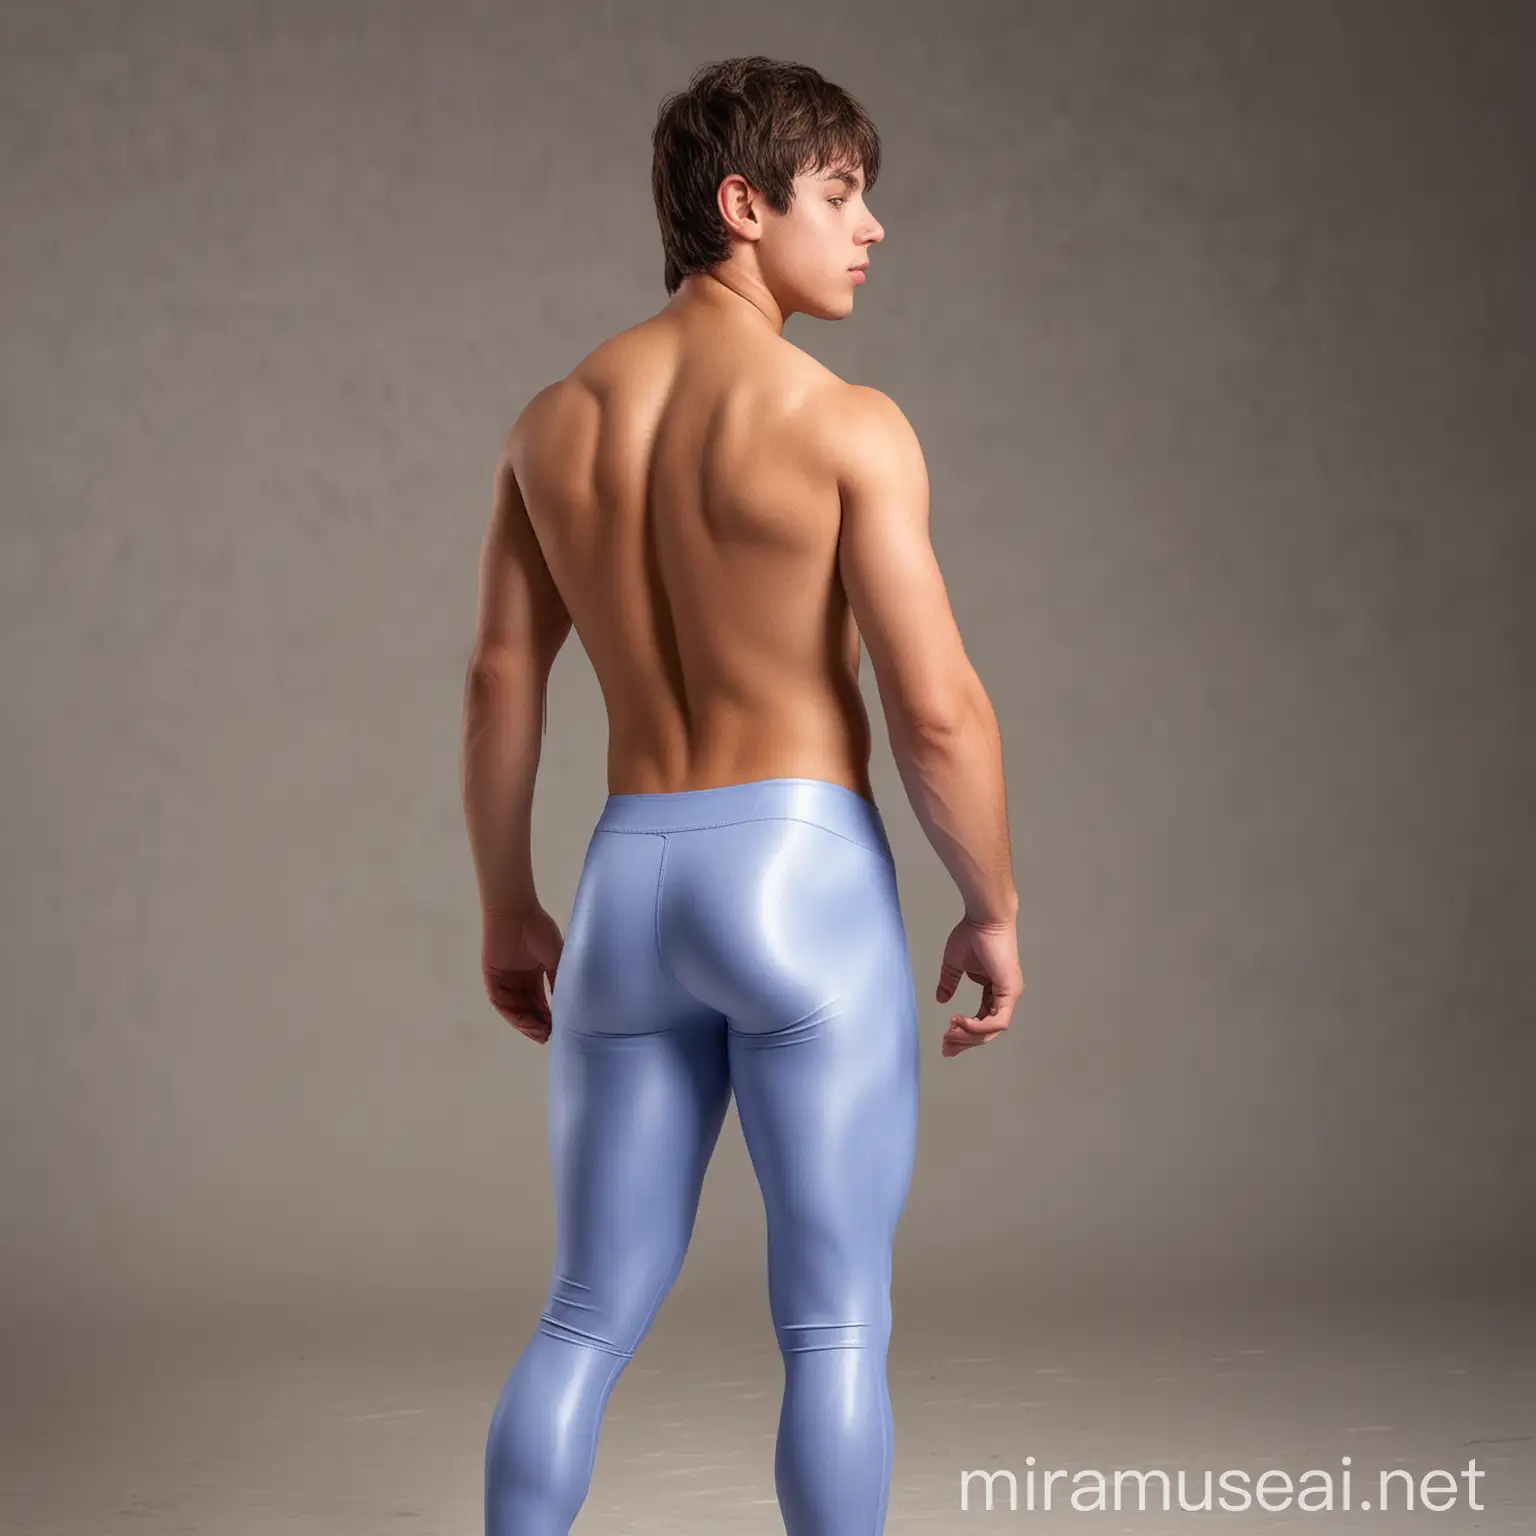 Charming fit shirtless 19 year old male Argentine wrestler, with short side-fringed brunette hair, mid-brown skin and hazel eyes, wearing long periwinkle spandex leggings, well defined buttocks, rear view